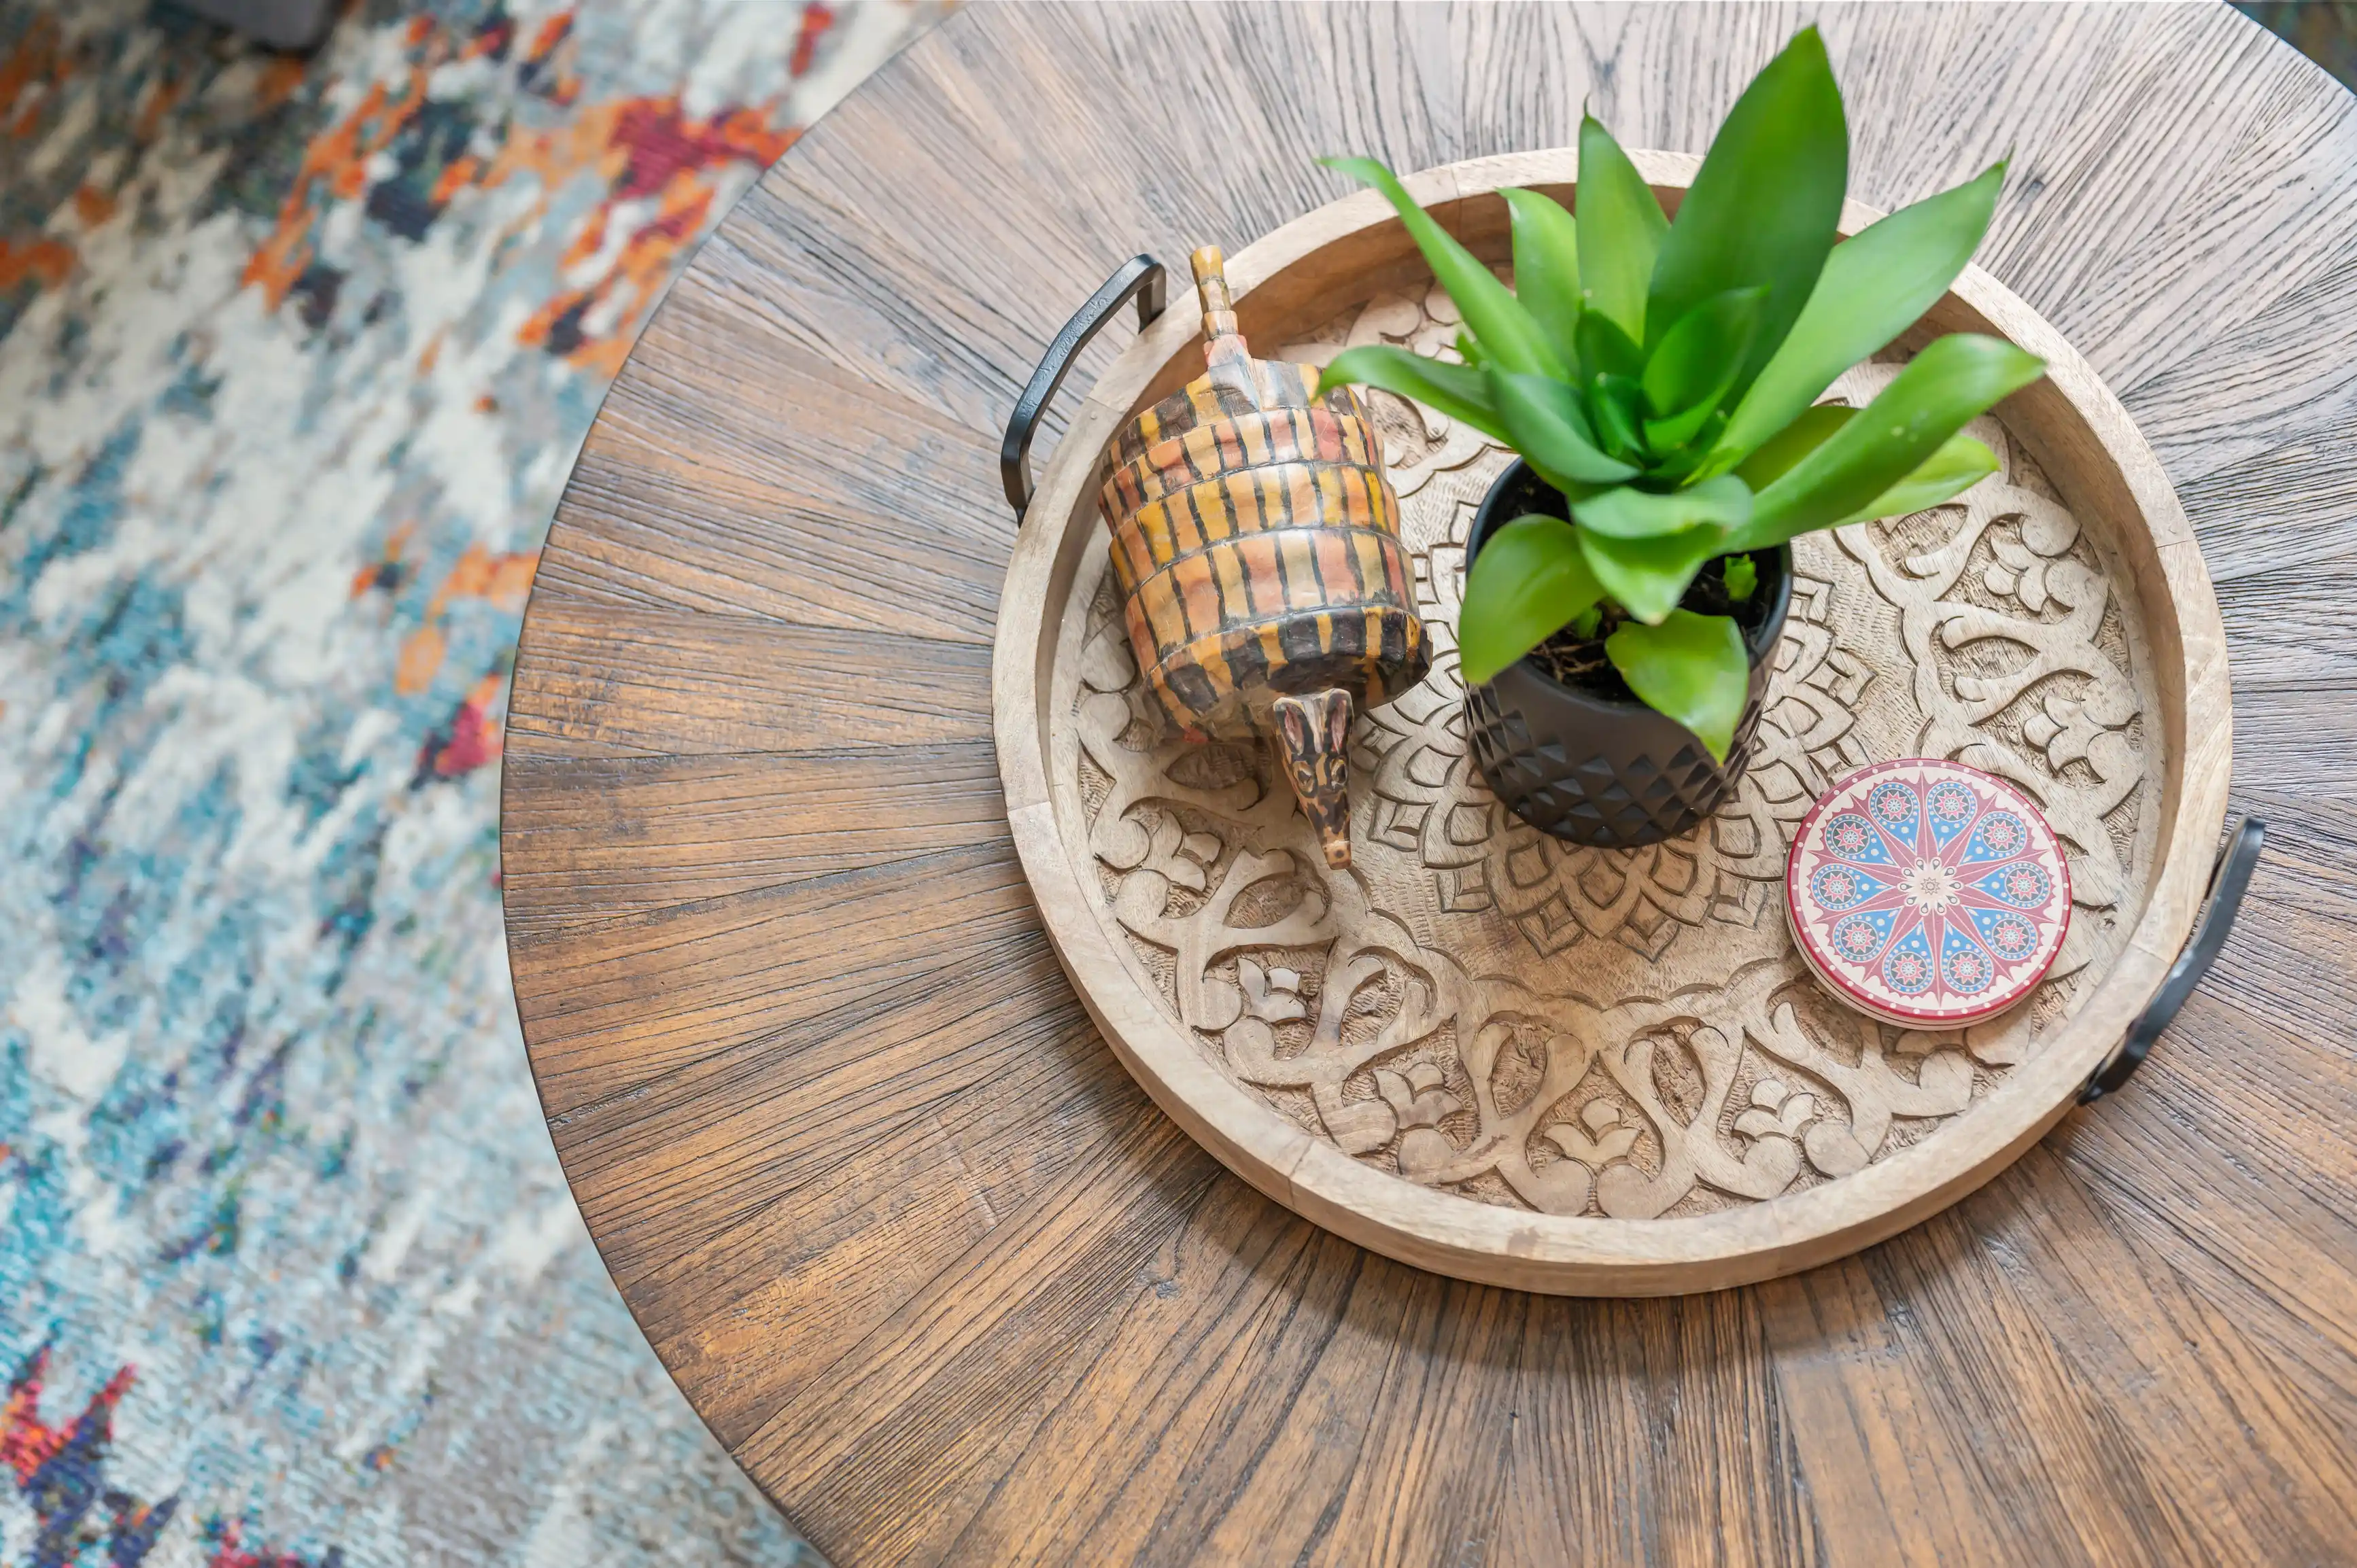 Decorative round wooden tray with intricate carving containing a succulent plant in a geometric pot, a small checkered decorative armadillo, and a red patterned coaster on a wooden floor with a colorful rug edge visible.